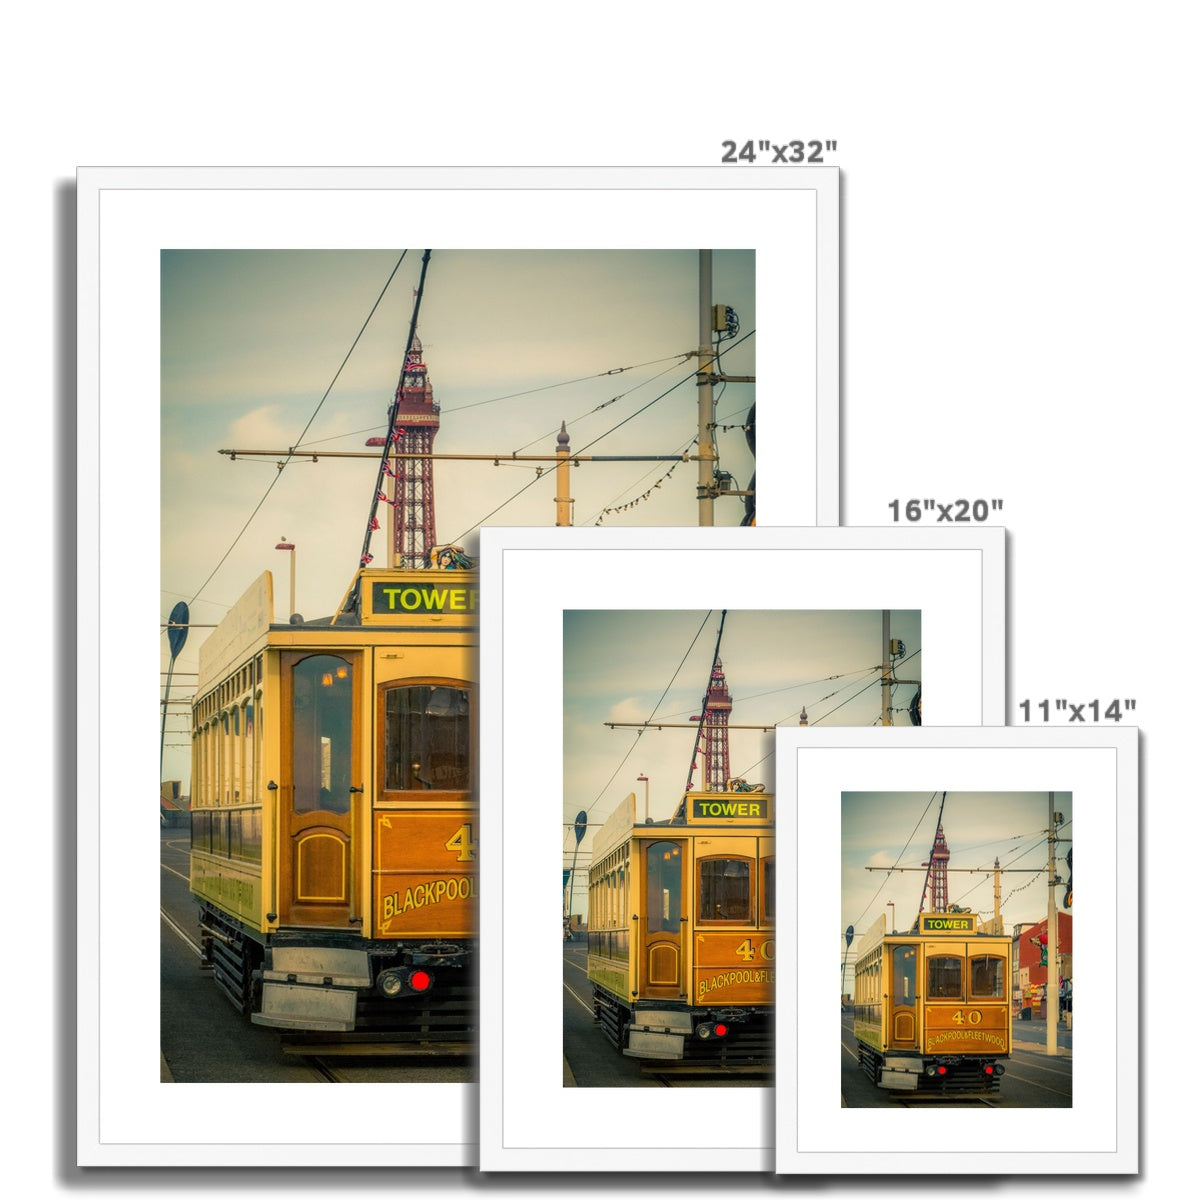 Traditional tram running along seafront promenade with Blackpool Tower in background - Blackpool,UK. Framed & Mounted Print